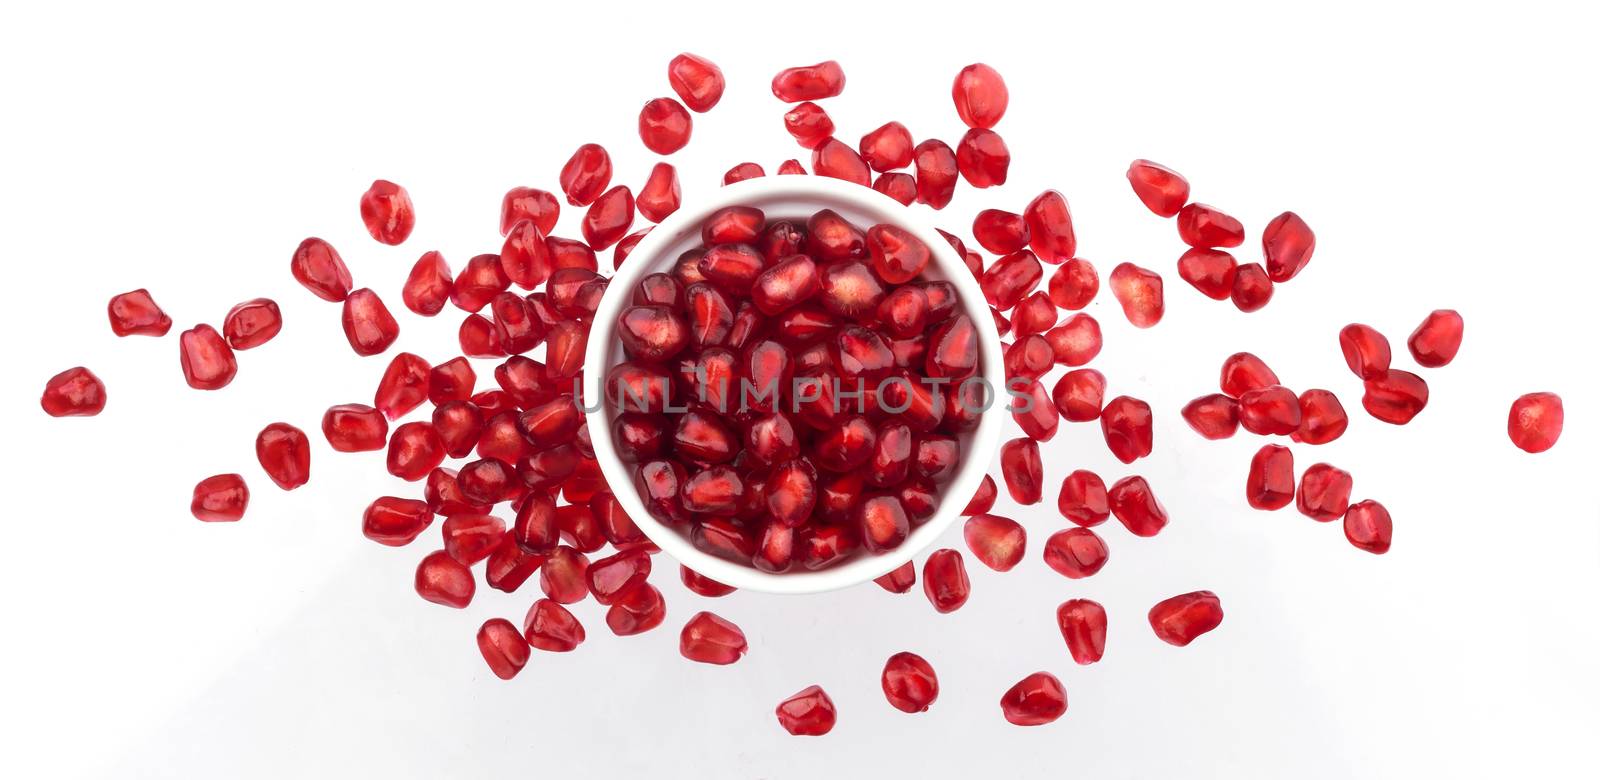 Pomegranate seeds isolated on white background, top view by xamtiw